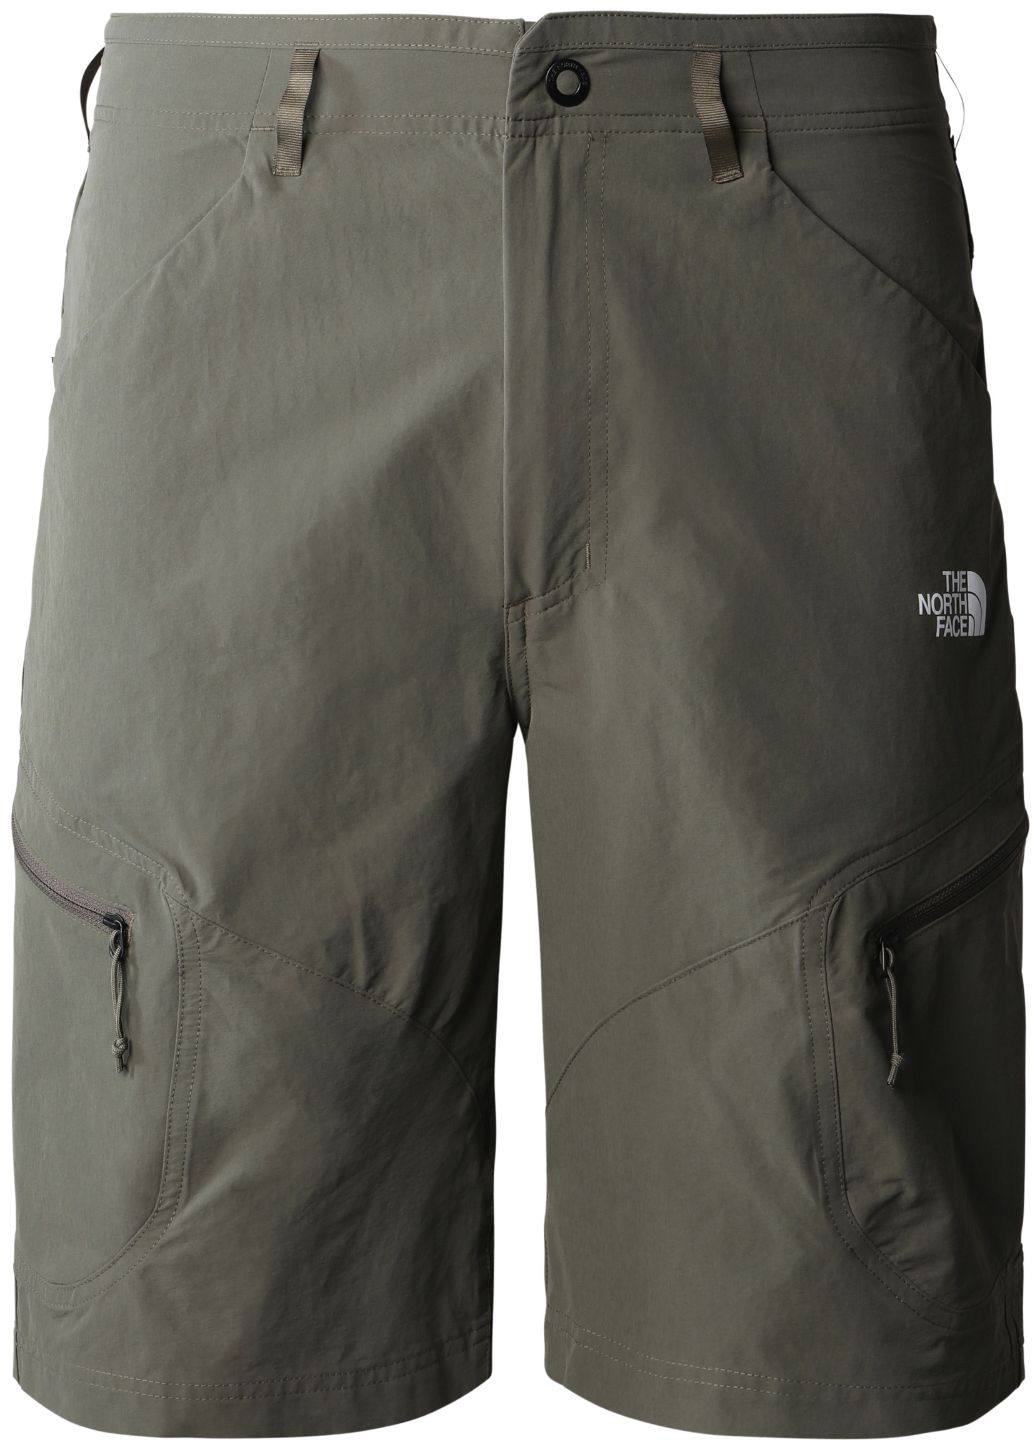 The North Face Exploration Short Taupe 34